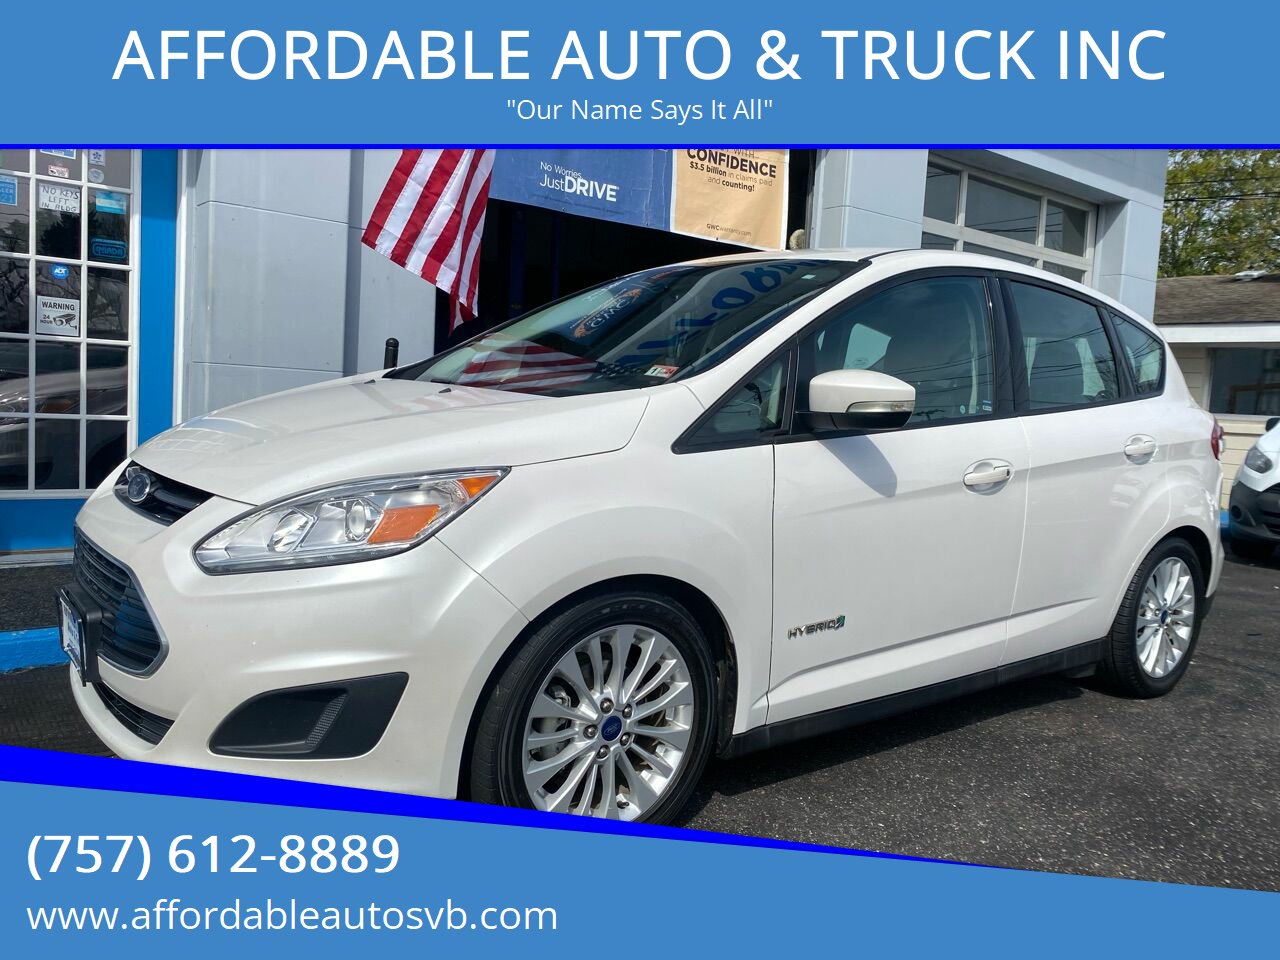 2017 Ford C-Max For Sale - Carsforsale.com®